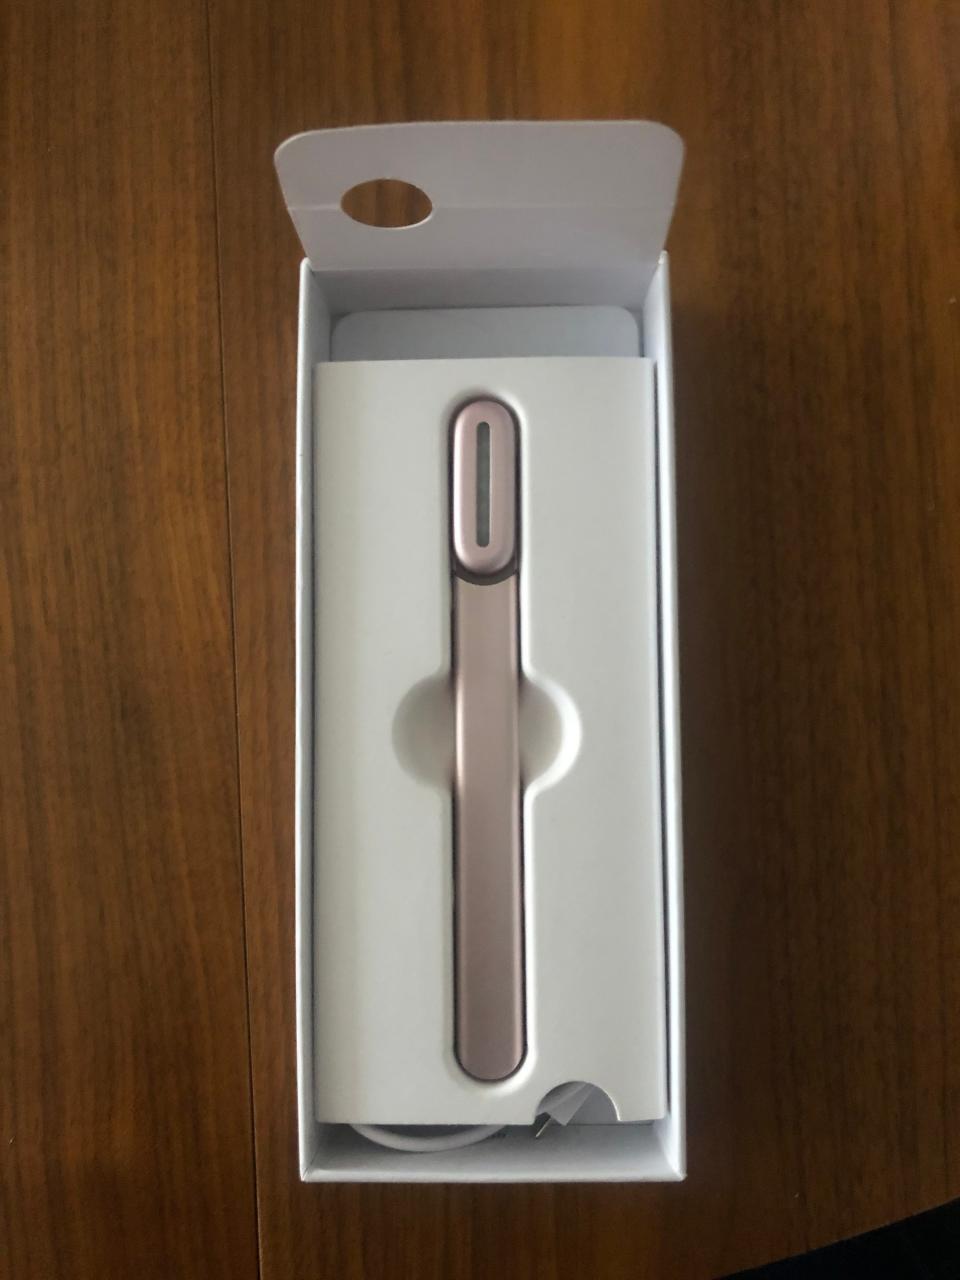 The Solawave wand in its box.